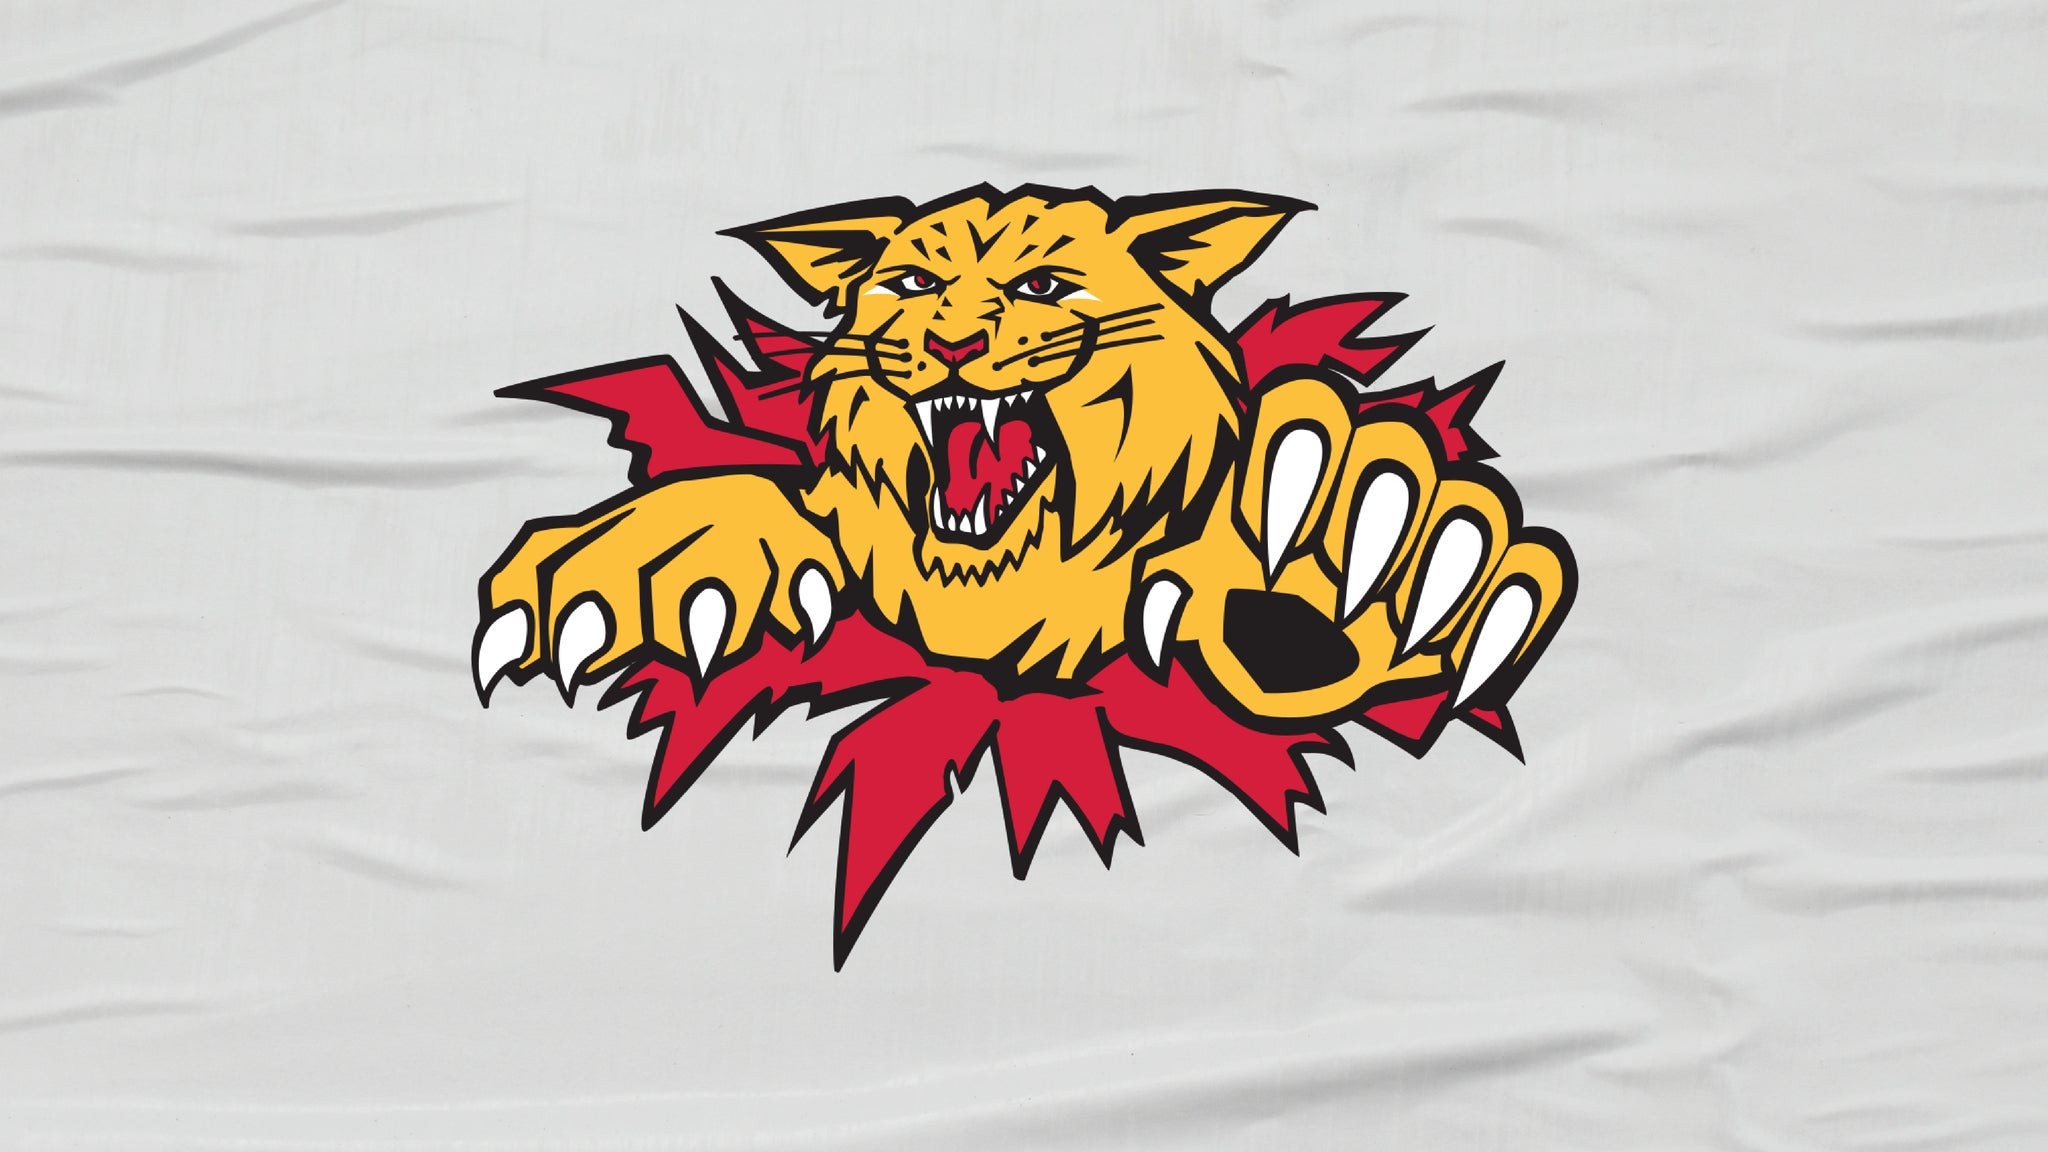 Moncton Wildcats vs. Saint John Sea Dogs in Moncton promo photo for CAA Members presale offer code